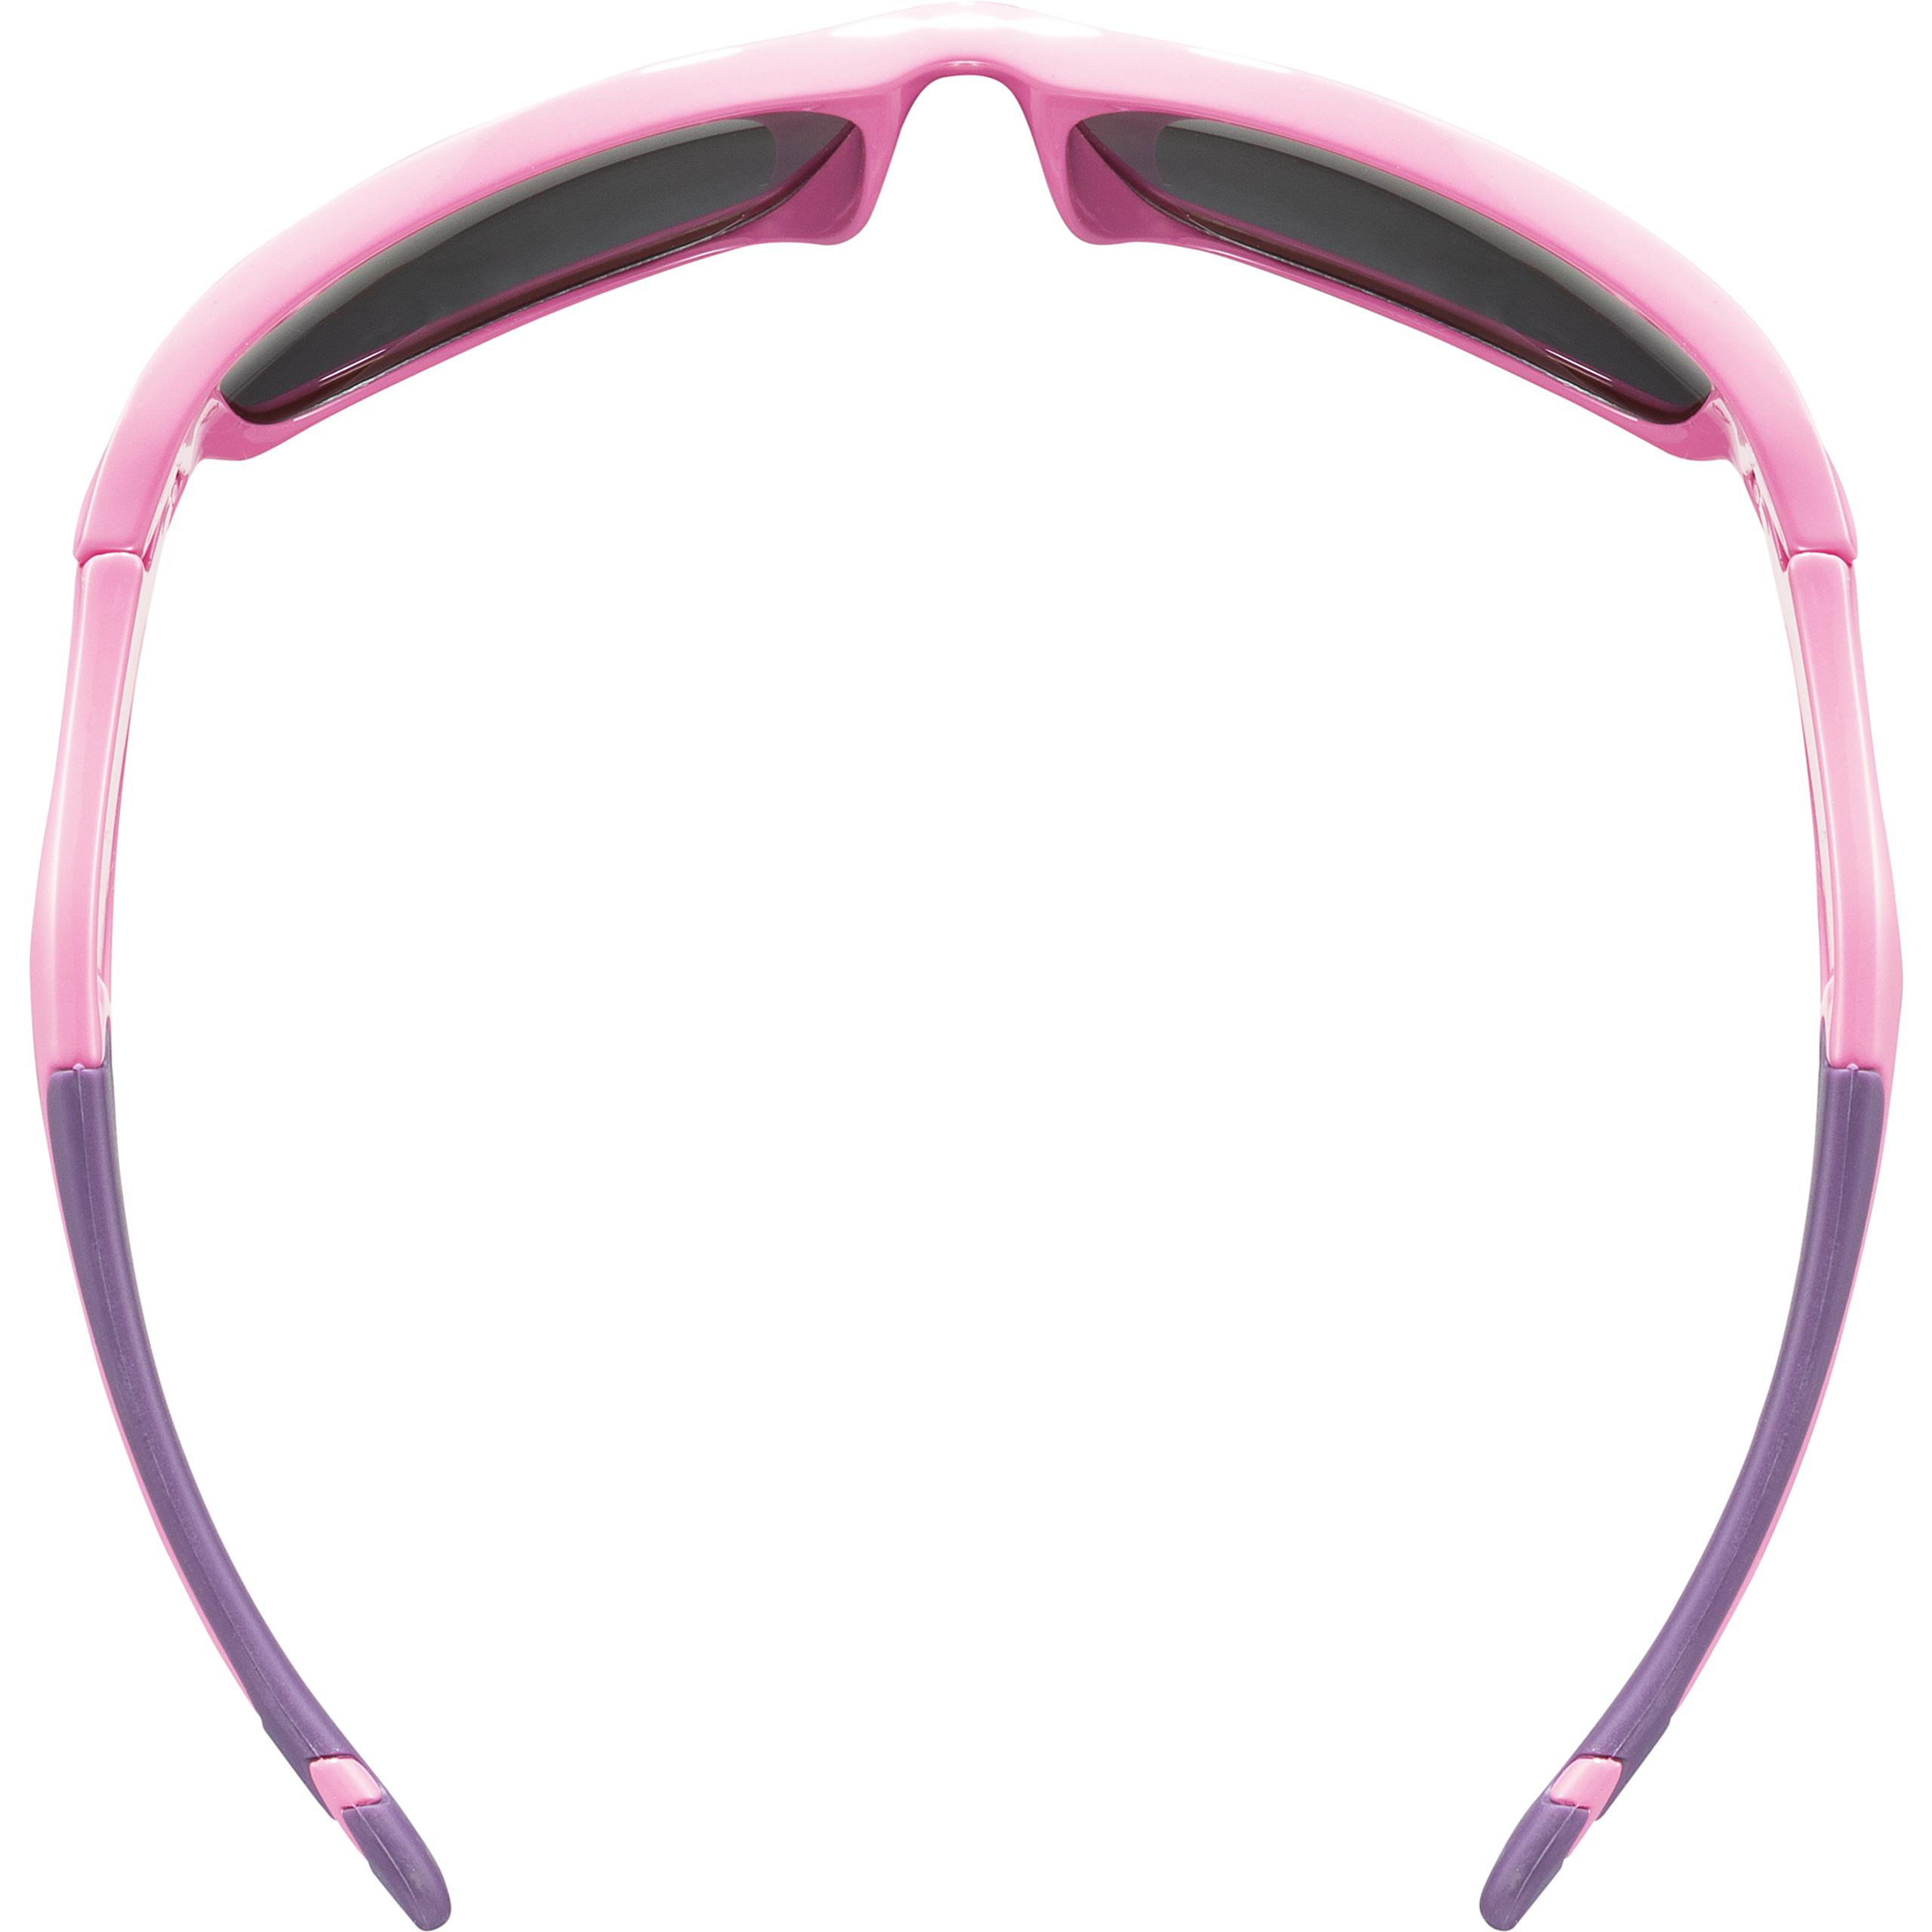 Details about   Uvex Eyewear 507 Sports Style Kids Sunglasses